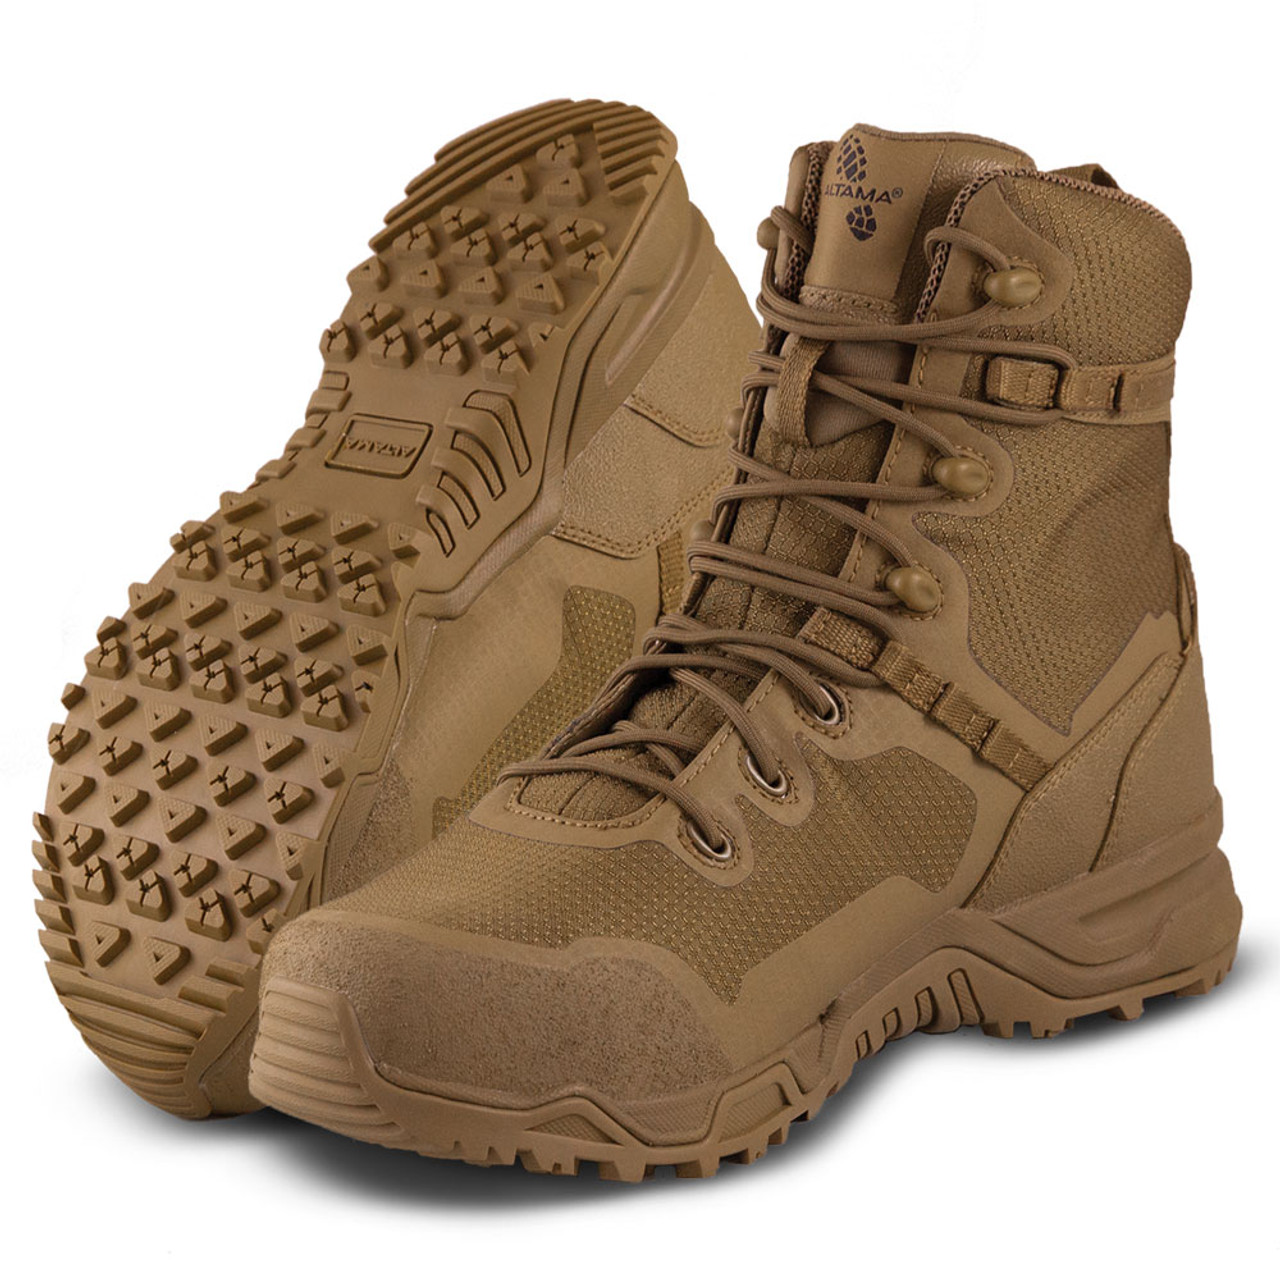 ALTAMA RAPTOR 8" SAFETY TOE BOOTS / COYOTE 322003